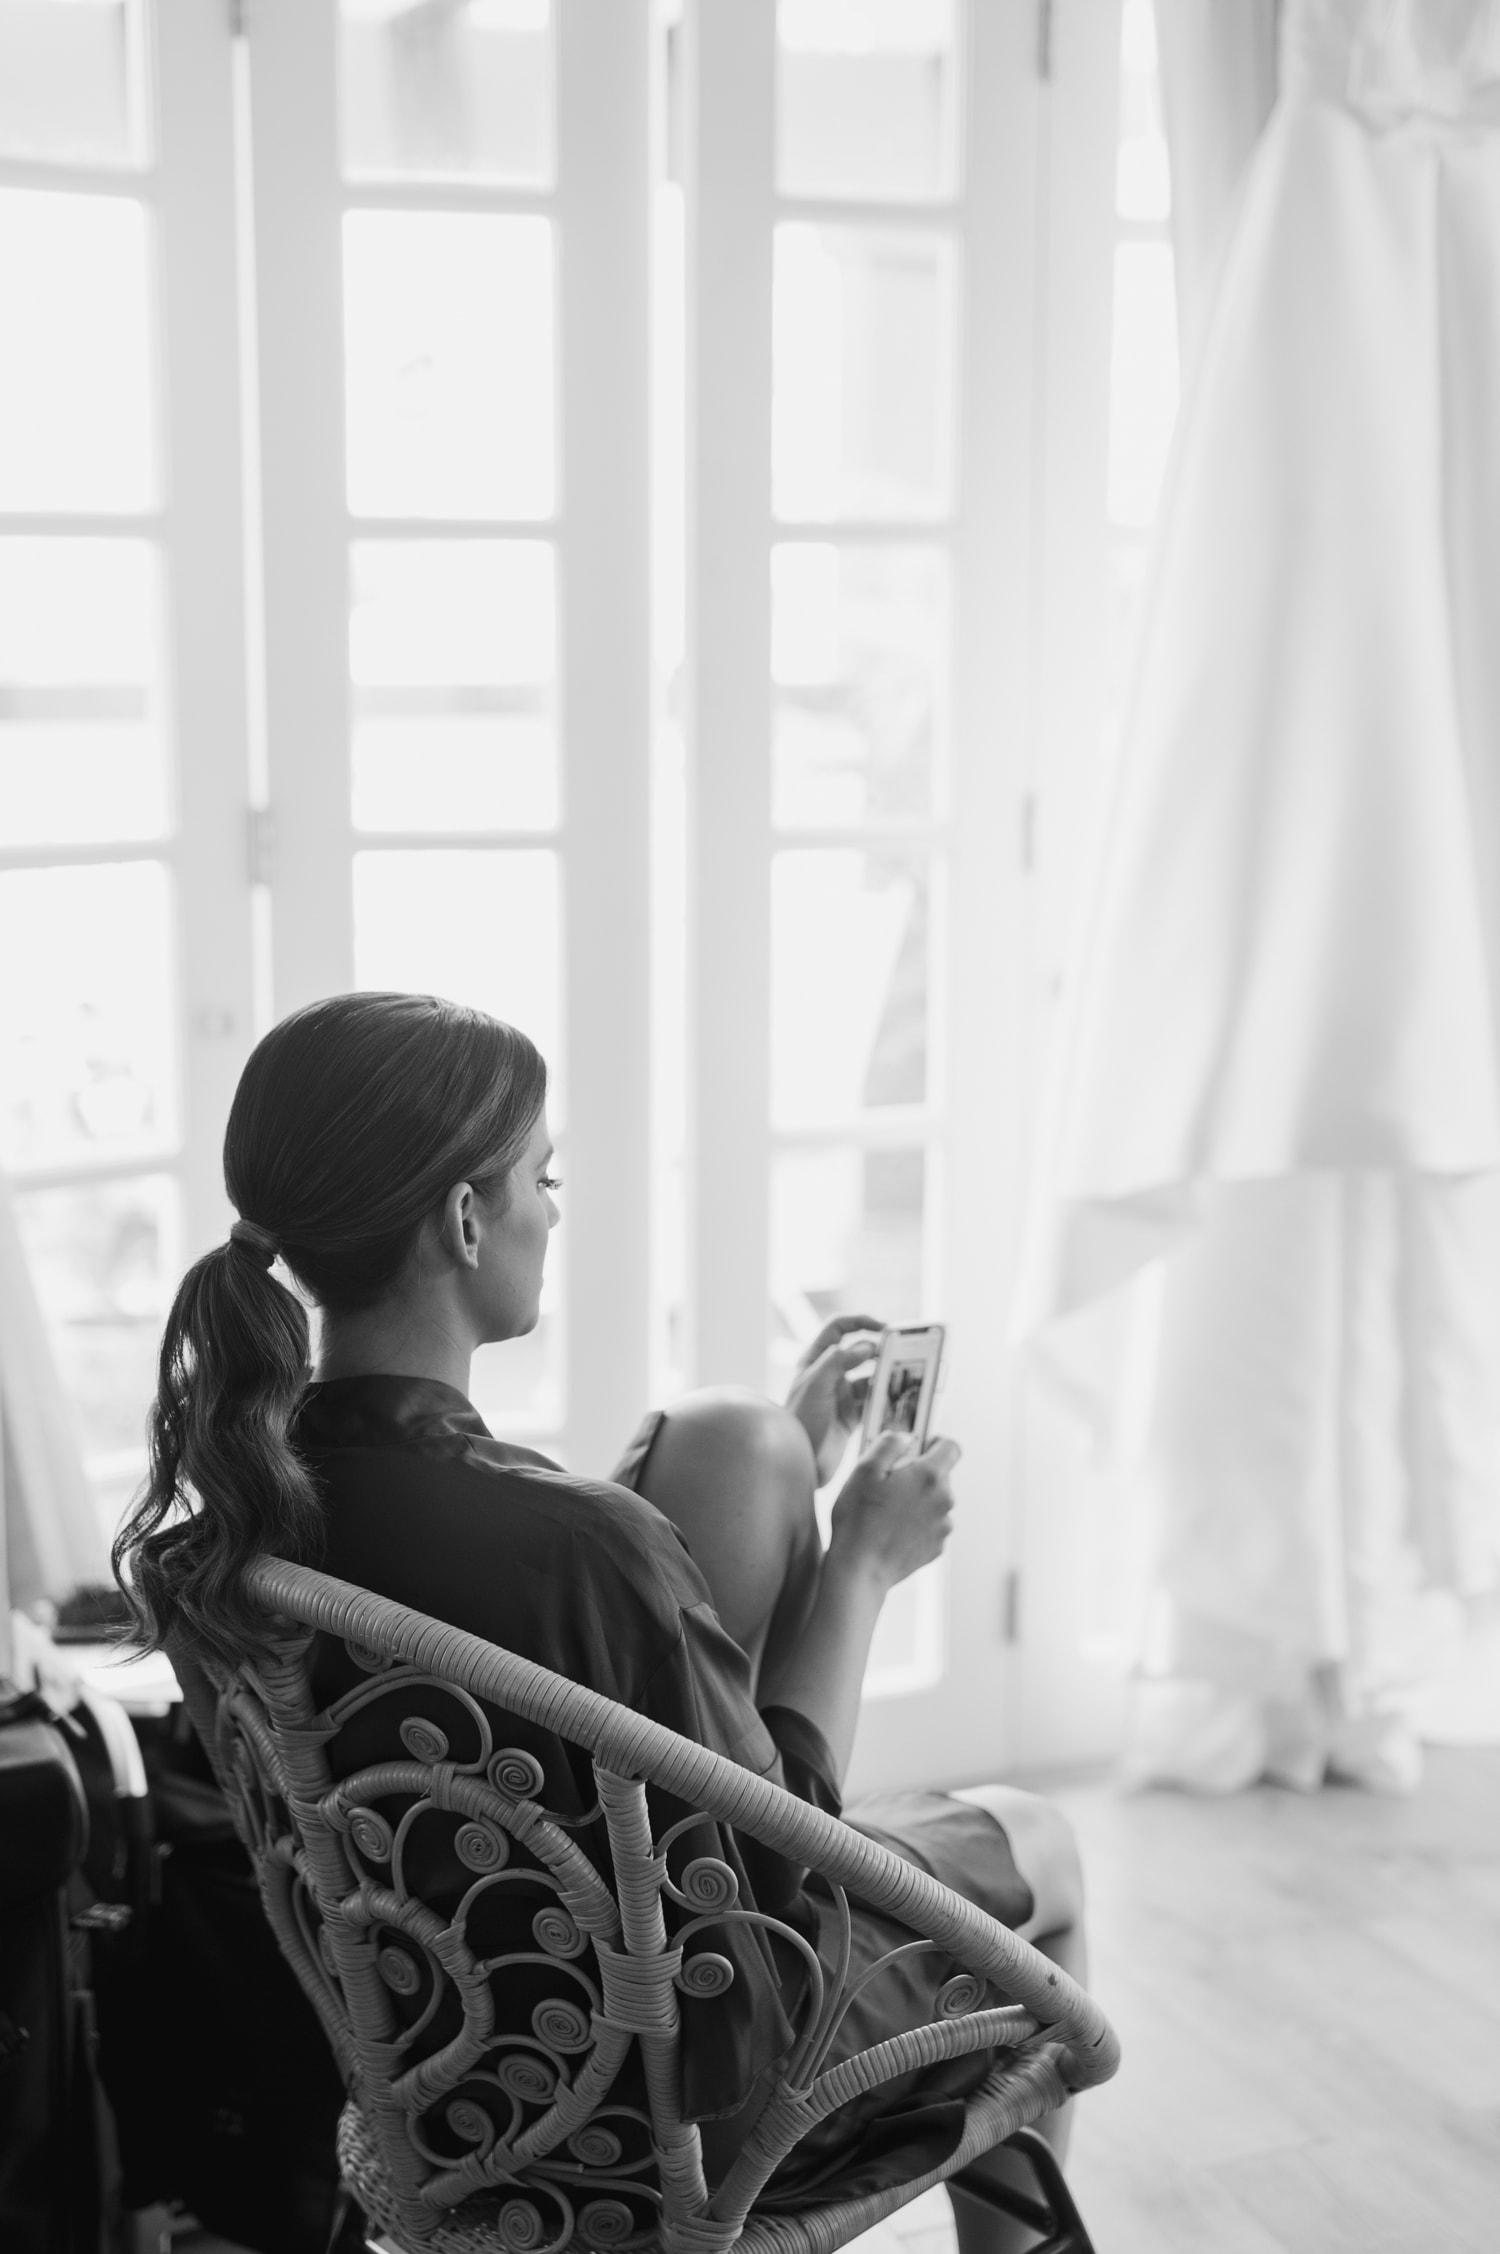 wedding photographer Camille Fontanez captures the bride and groom preparation, getting ready for their wedding day in the beautiful rooms of Casa Los Cummings in Condado Puerto Rico